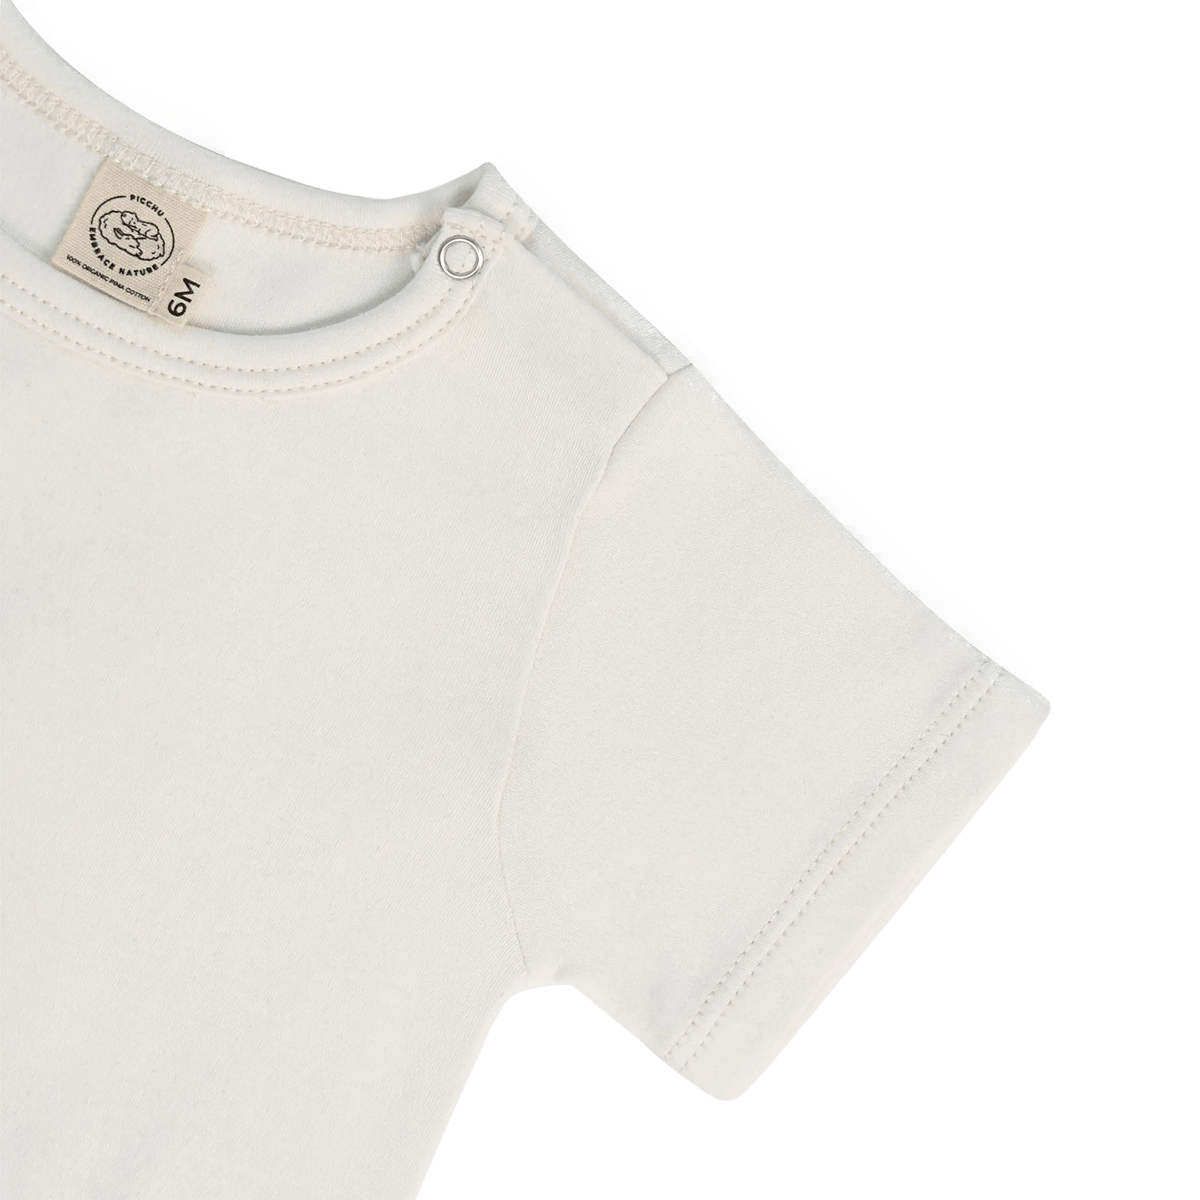 Organic cotton tee for women in white color